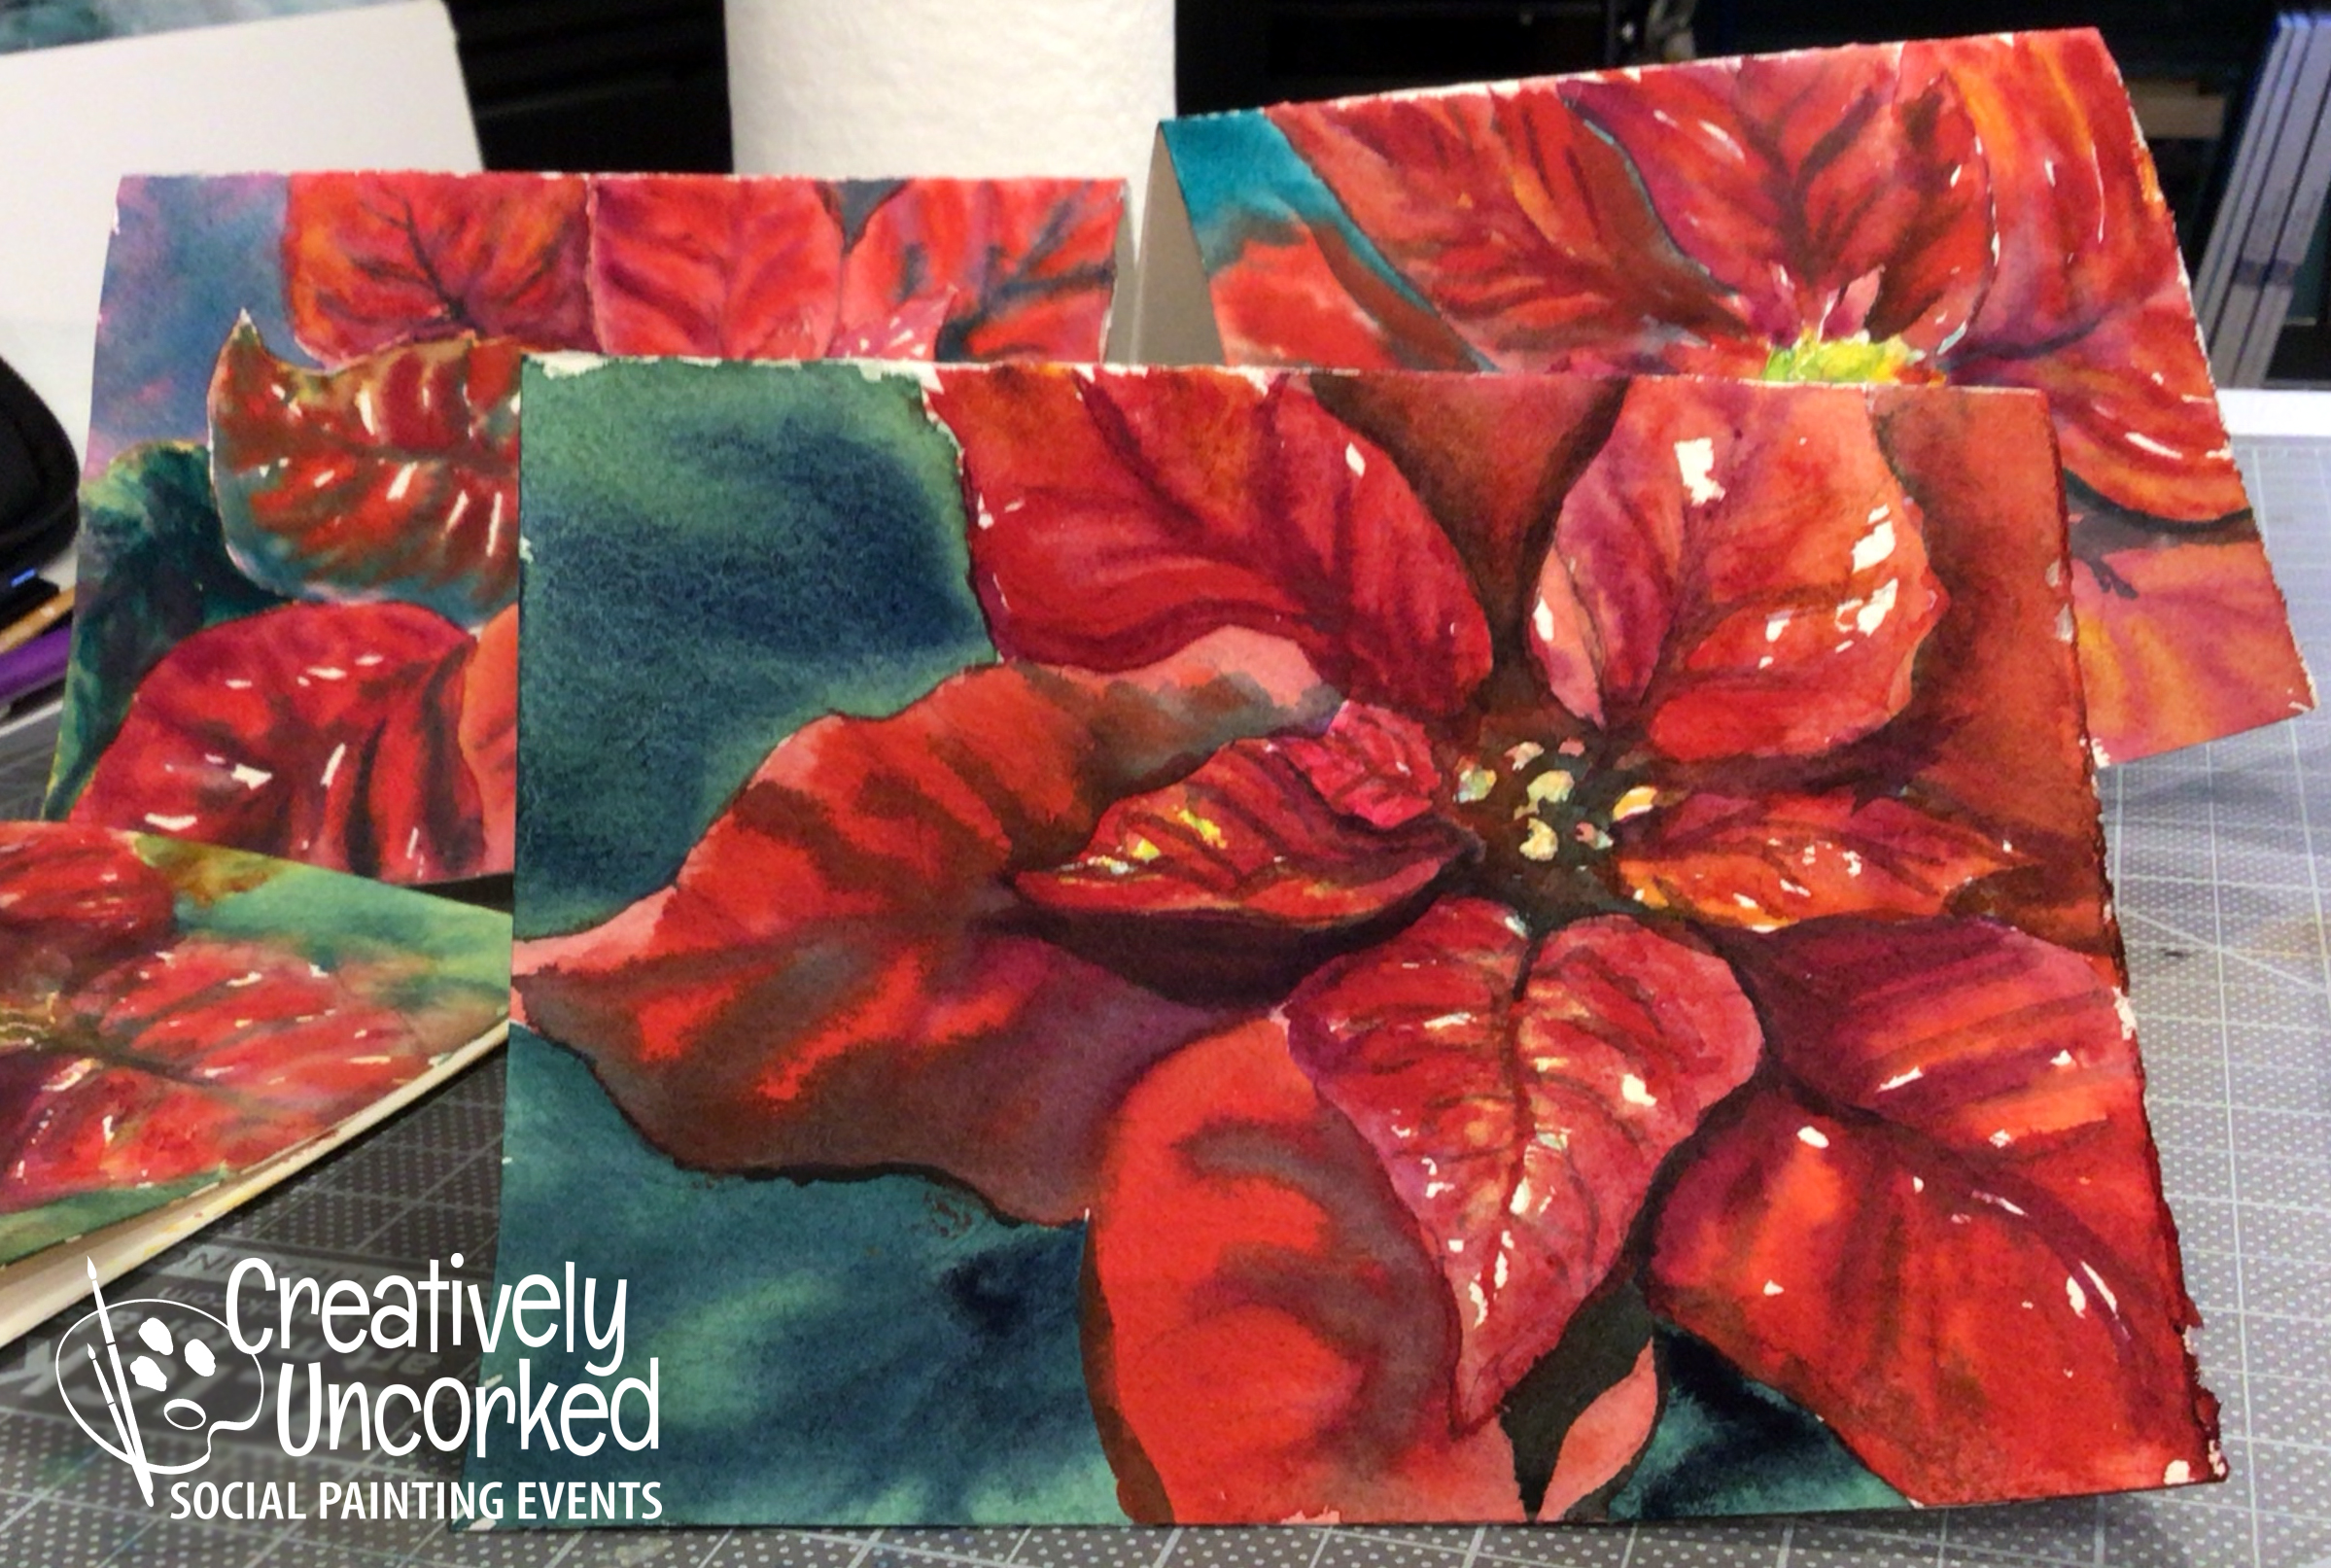 Poinsettia Holiday Cards by Creatively Uncorked http://creativelyuncorked.com/